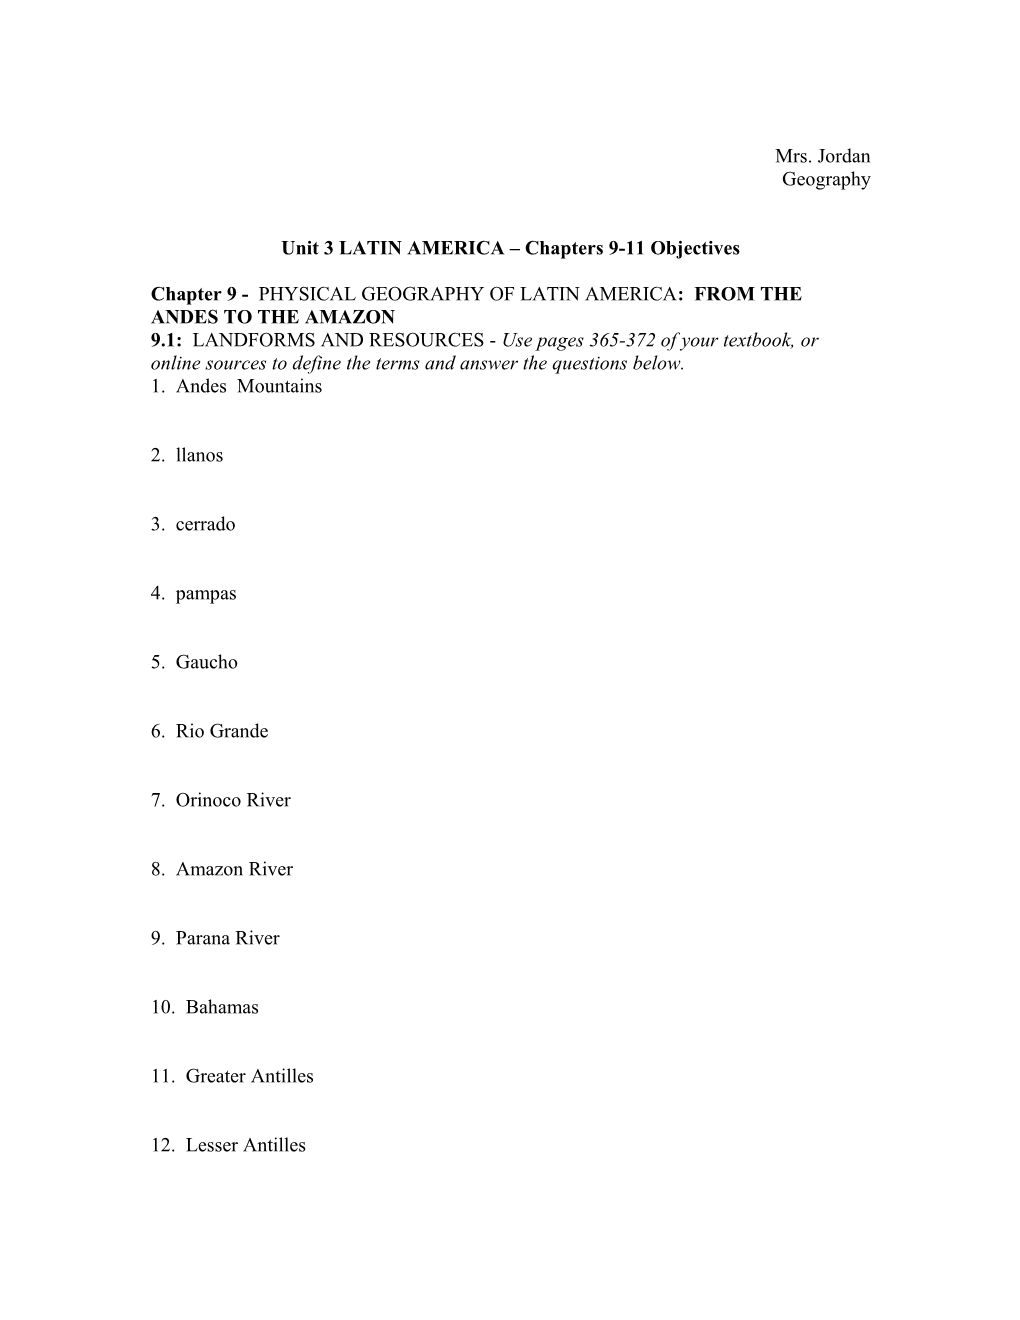 Unit 3 LATIN AMERICA Chapters 9-11 Objectives